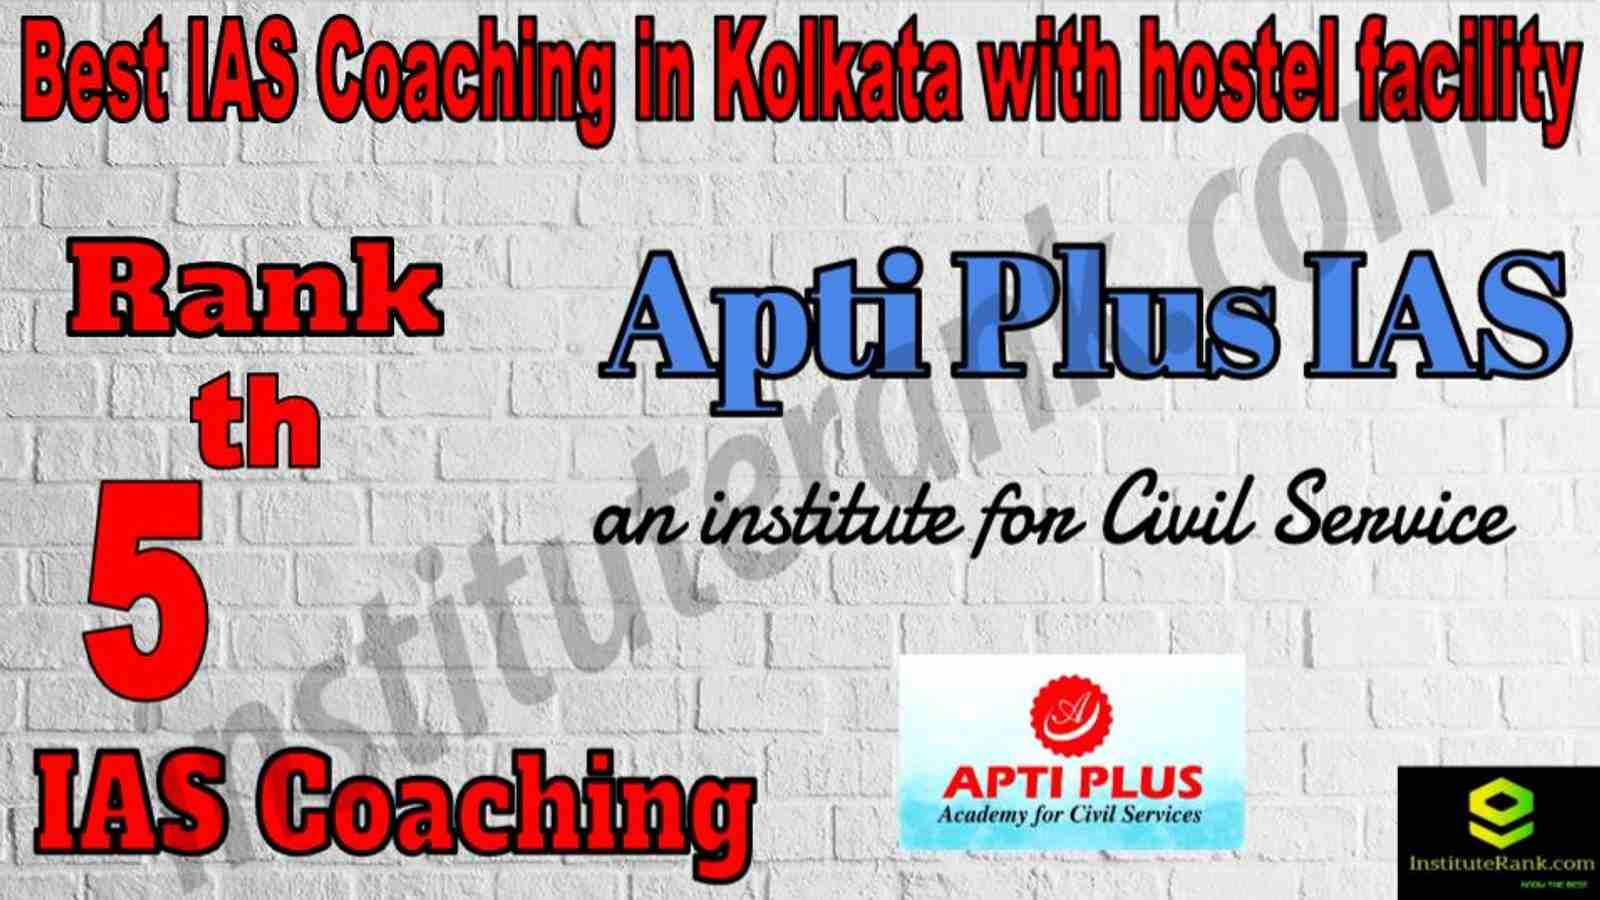 5th Best IAS Coaching in Kolkata with hostel facility